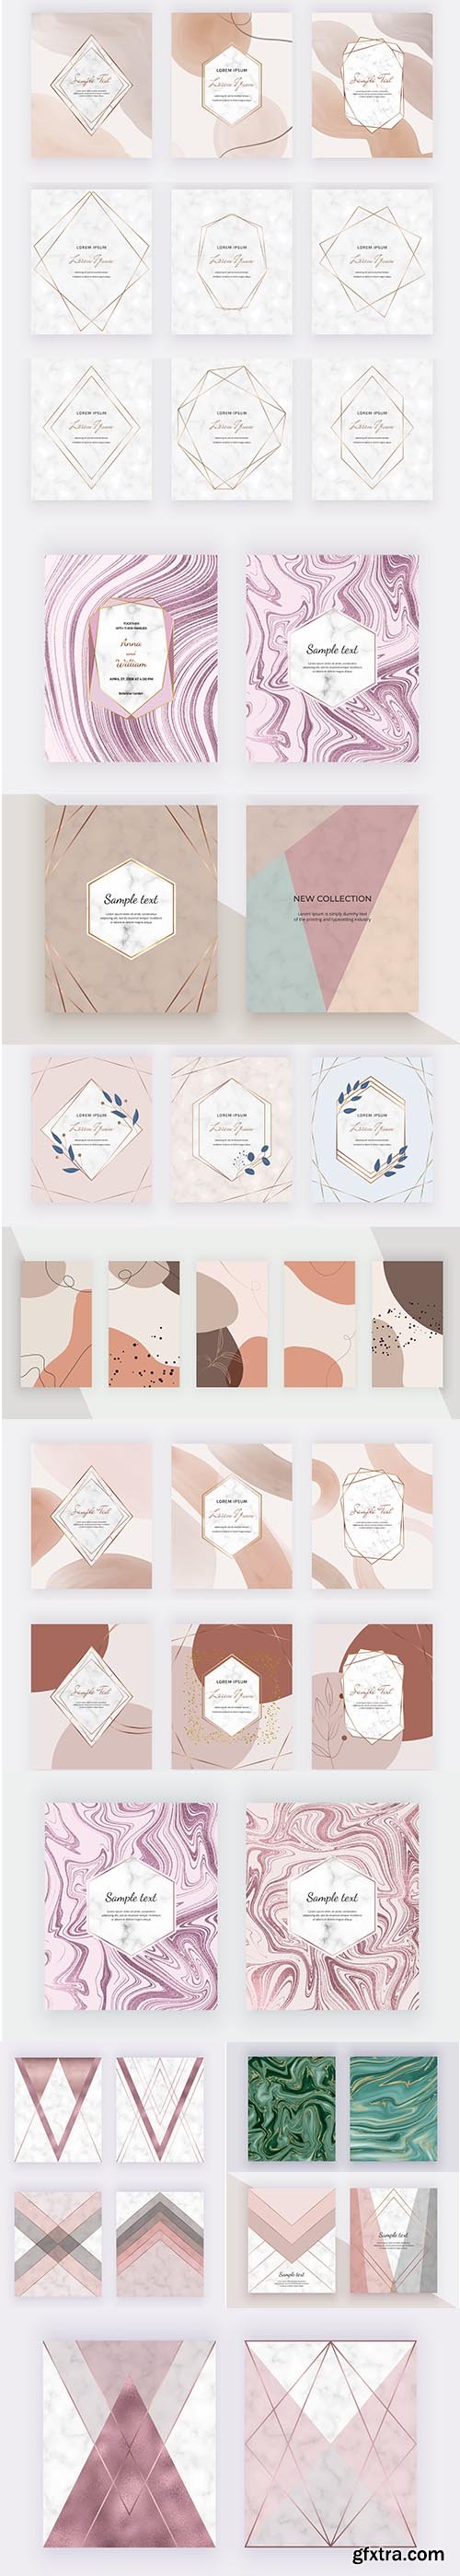 Marble Geometric Design with Pink Grey Triangular Rose Gold Foil Texture